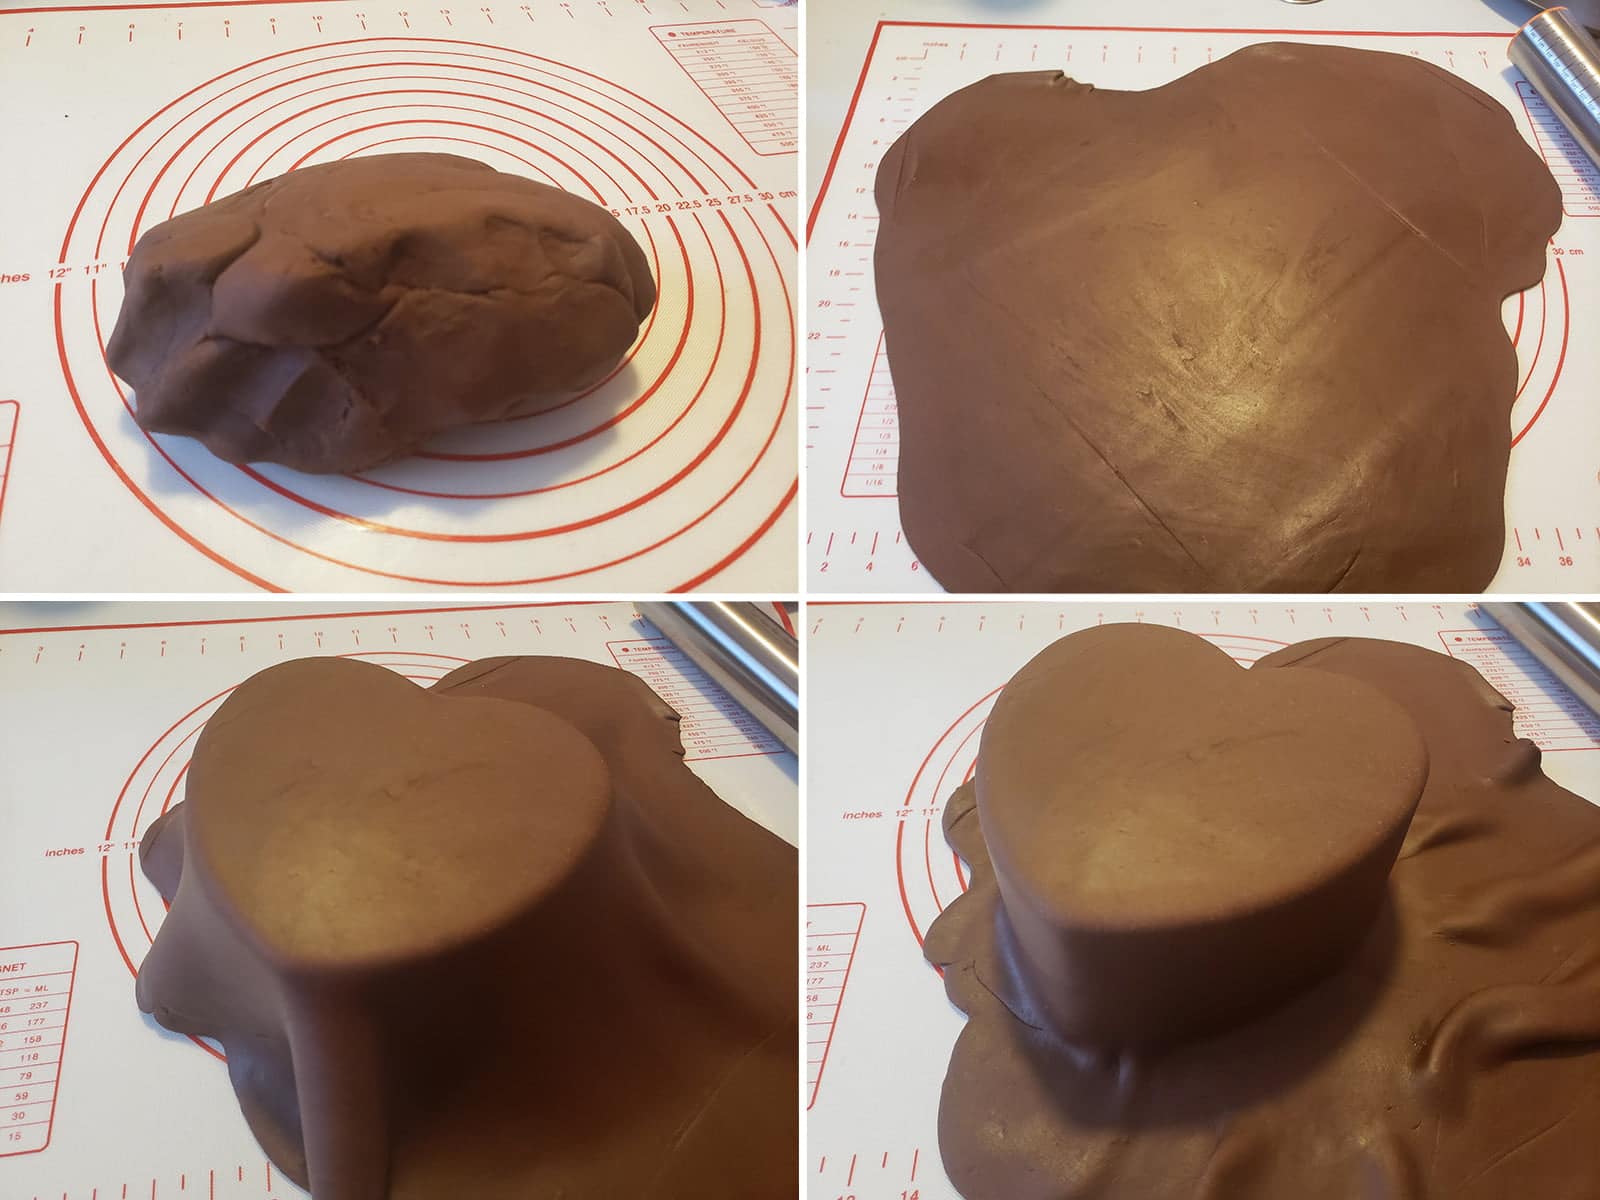 A 4 part compilation photo, demonstrating the steps of covering a cake with chocolate fondant.